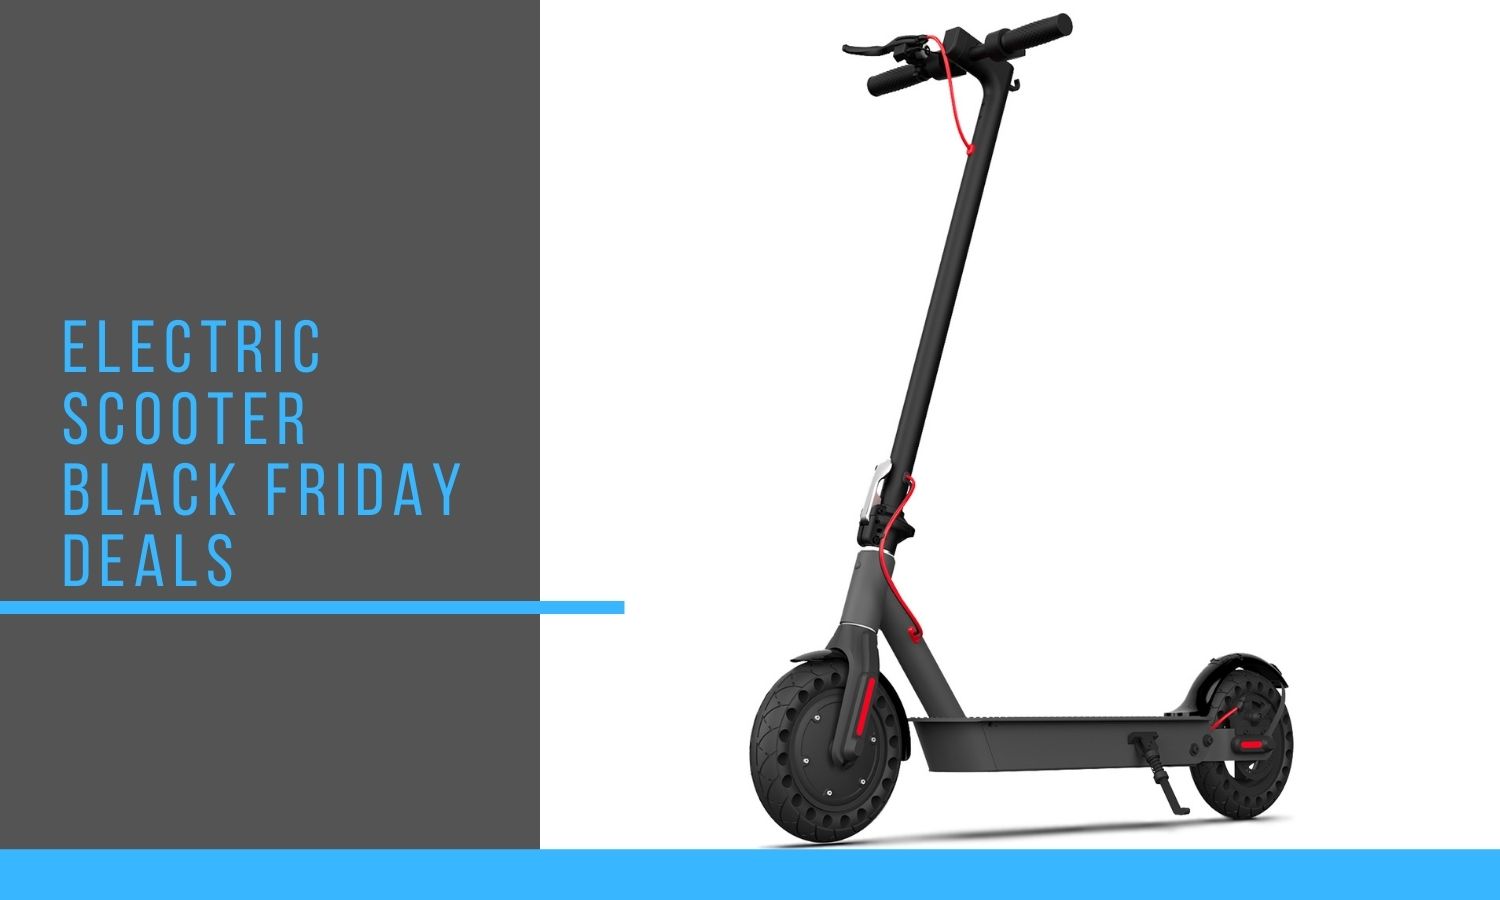 Best Electric Scooter Black Friday Deals 2020 | Mighty Gadget Blog: UK Technology News and Reviews